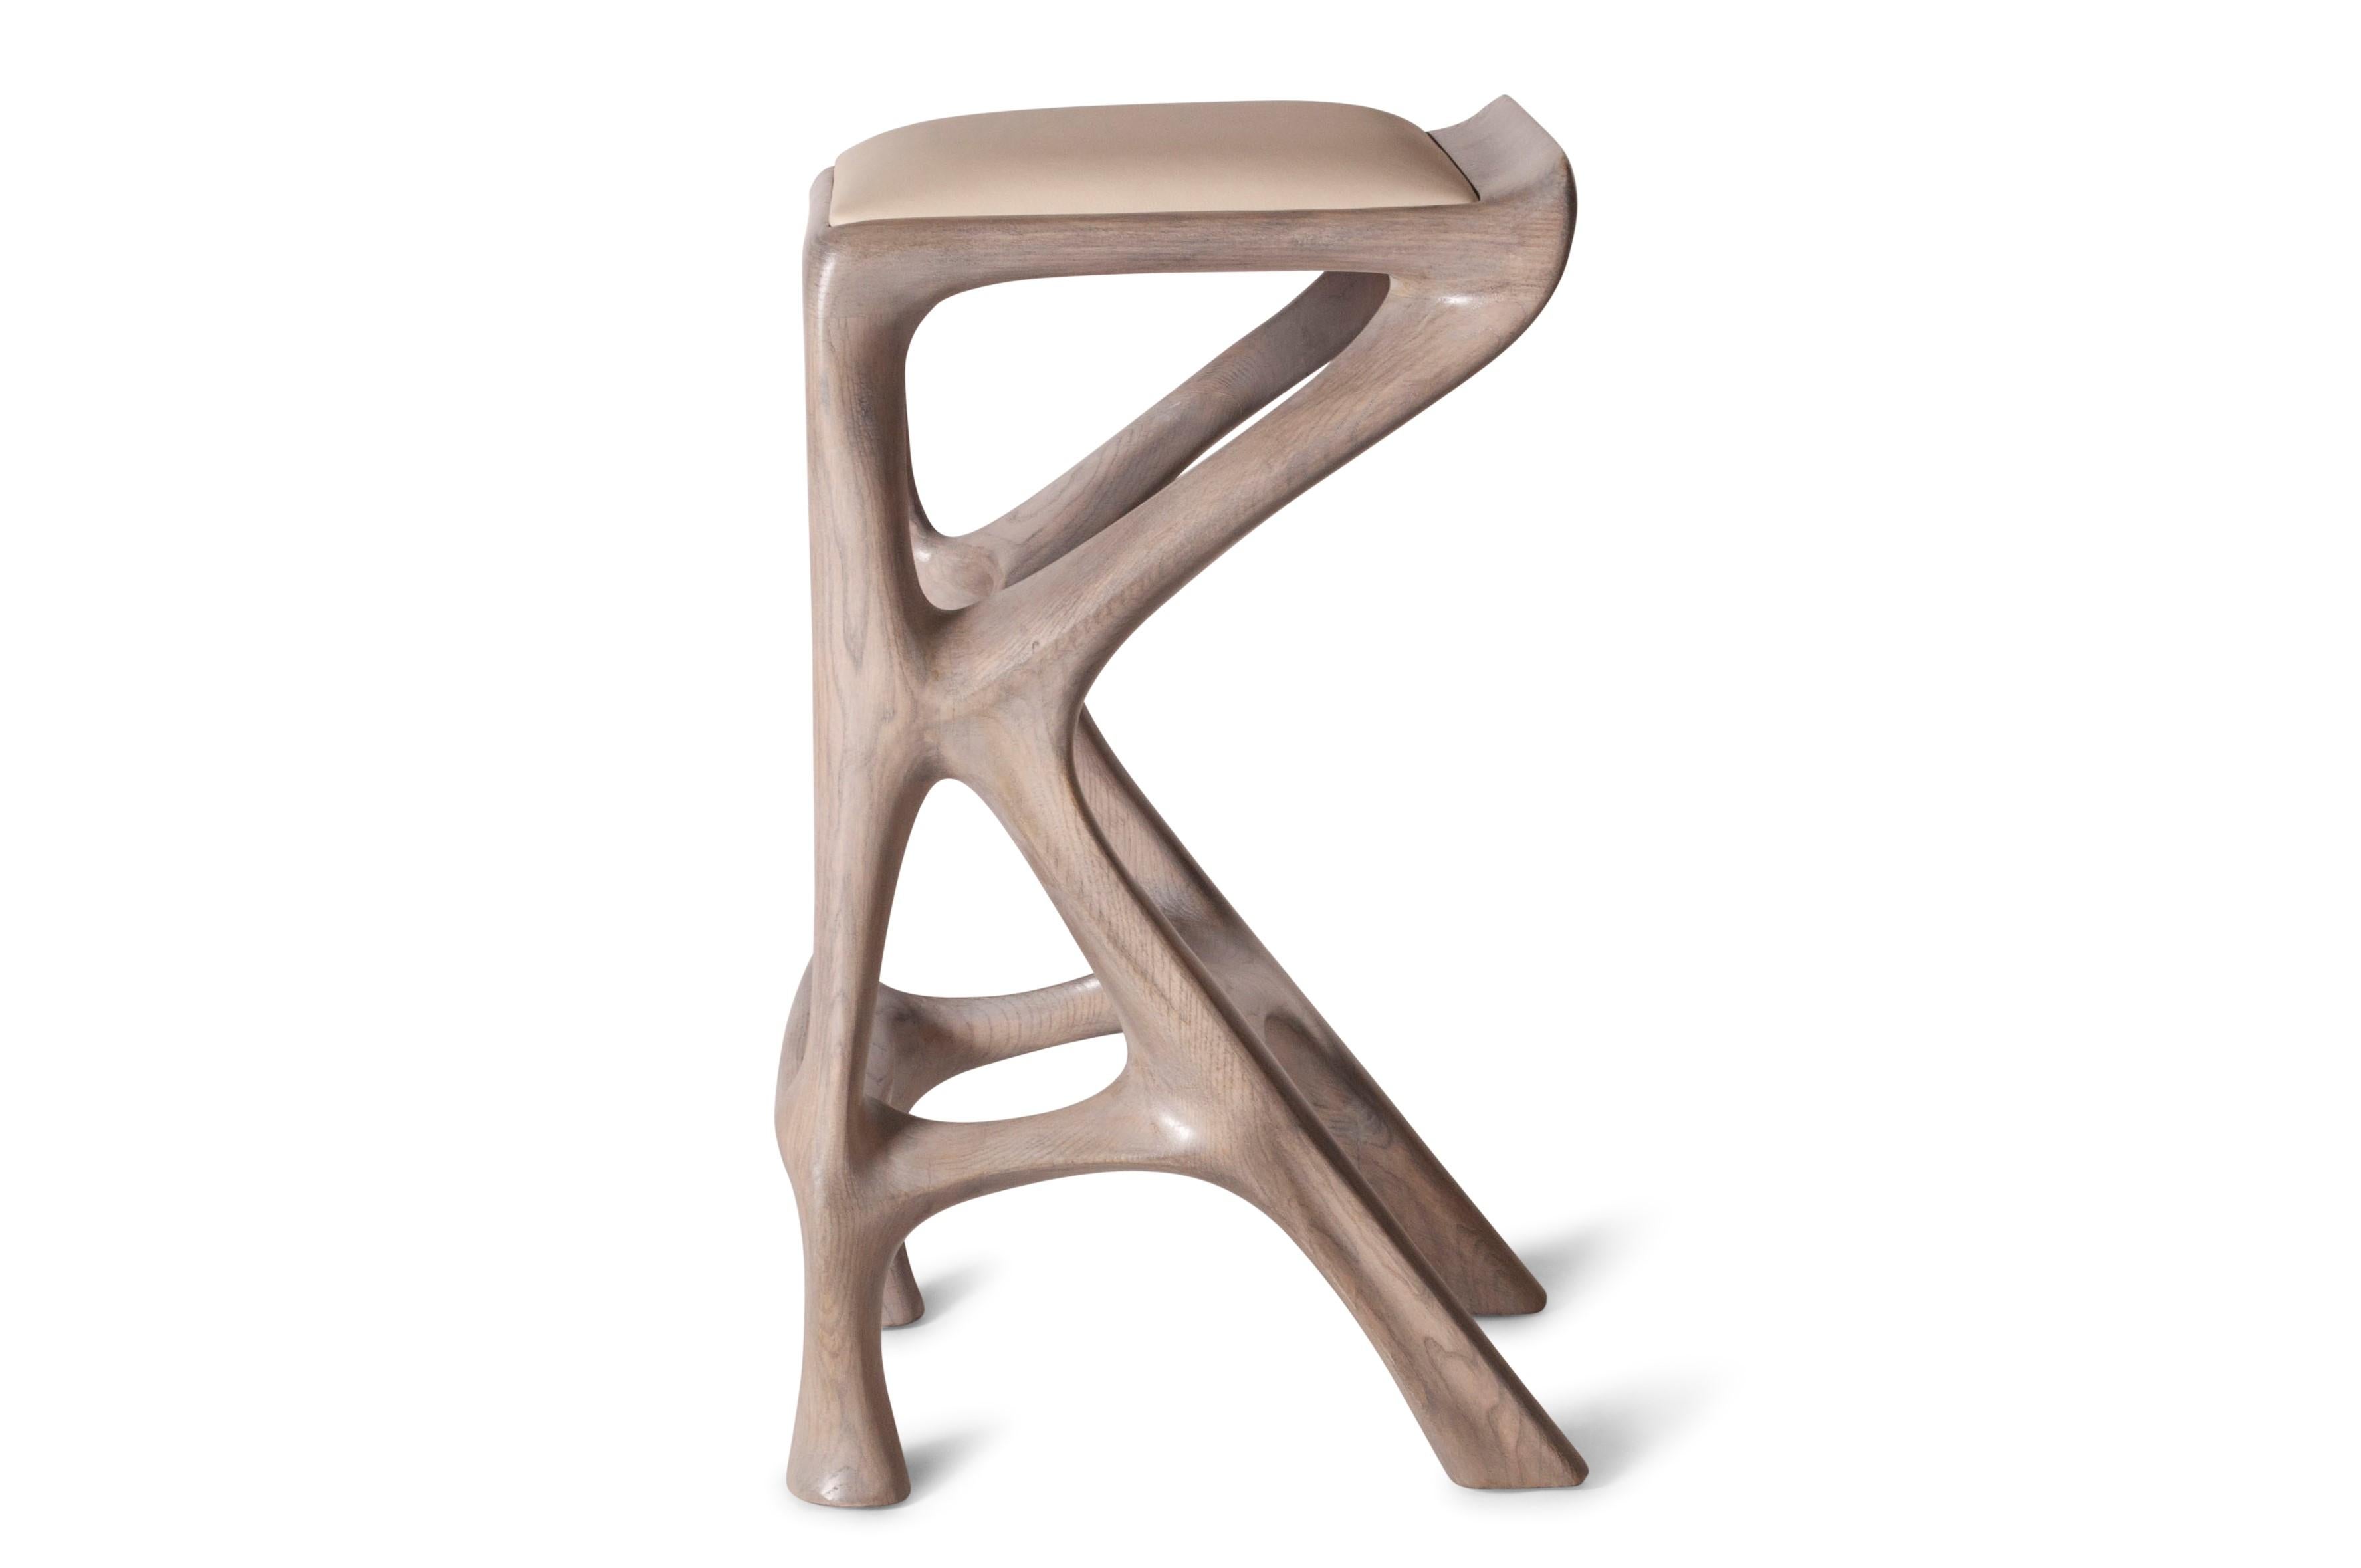 Barstool designed by Amorph made out of solid ashwood and leather. Stain color: Rusted walnut
Dimension 27